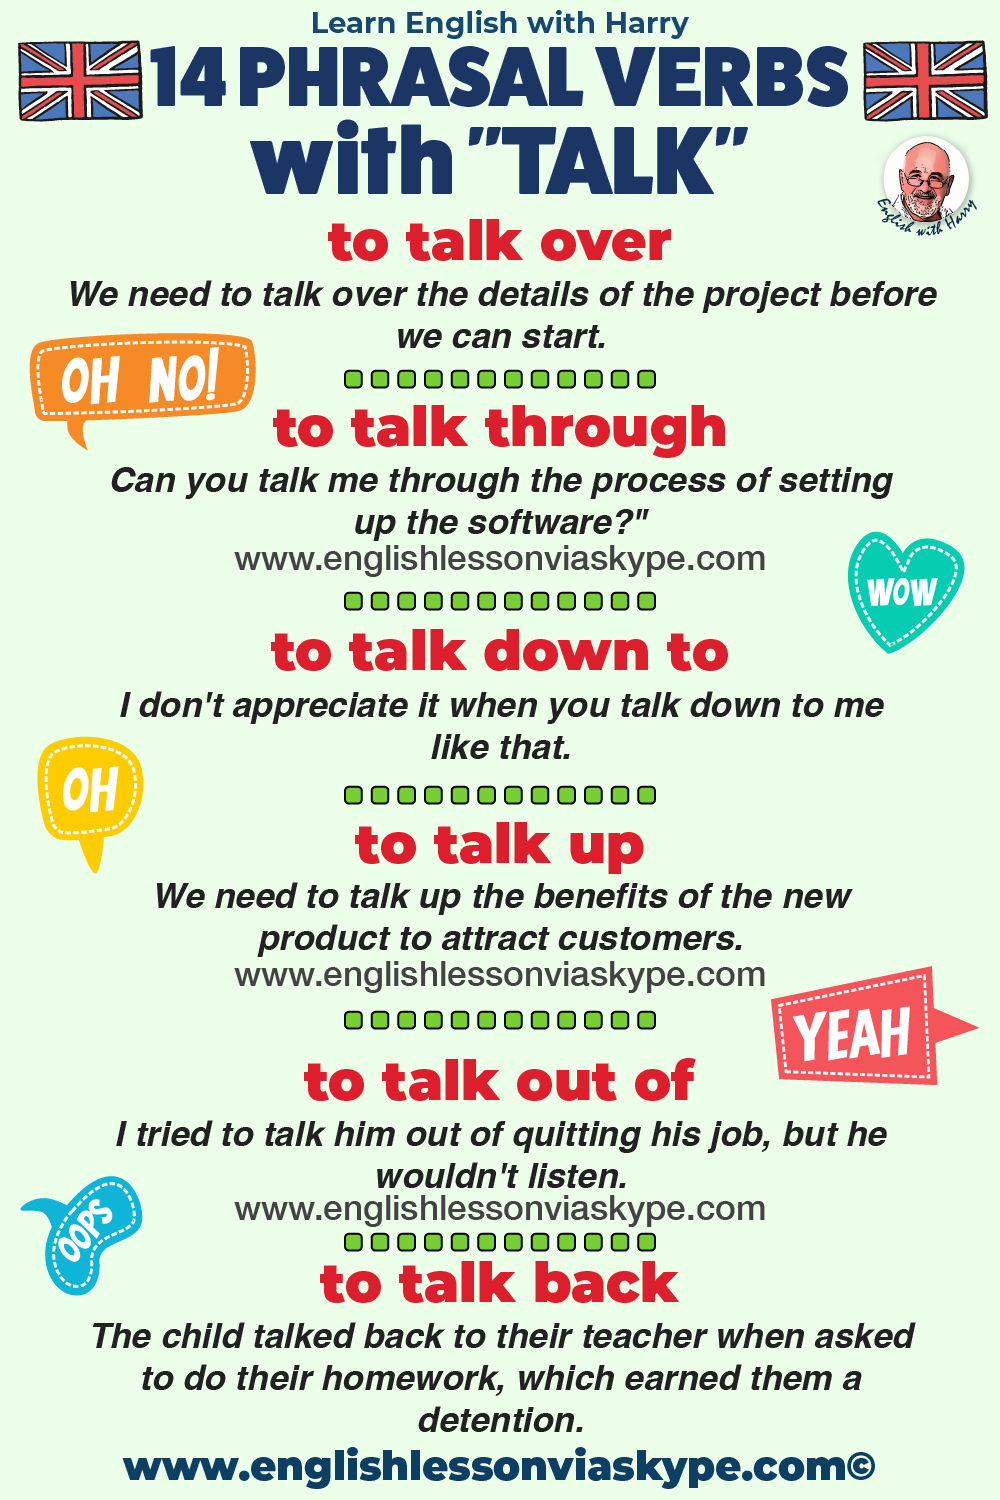 Learn phrasal verbs with talk. Improve English speaking skills. Upgrade your vocabulary. English grammar rules. Improve English speaking. Advanced English lessons on Zoom and Skype. Improve English speaking and writing skills. #learnenglish